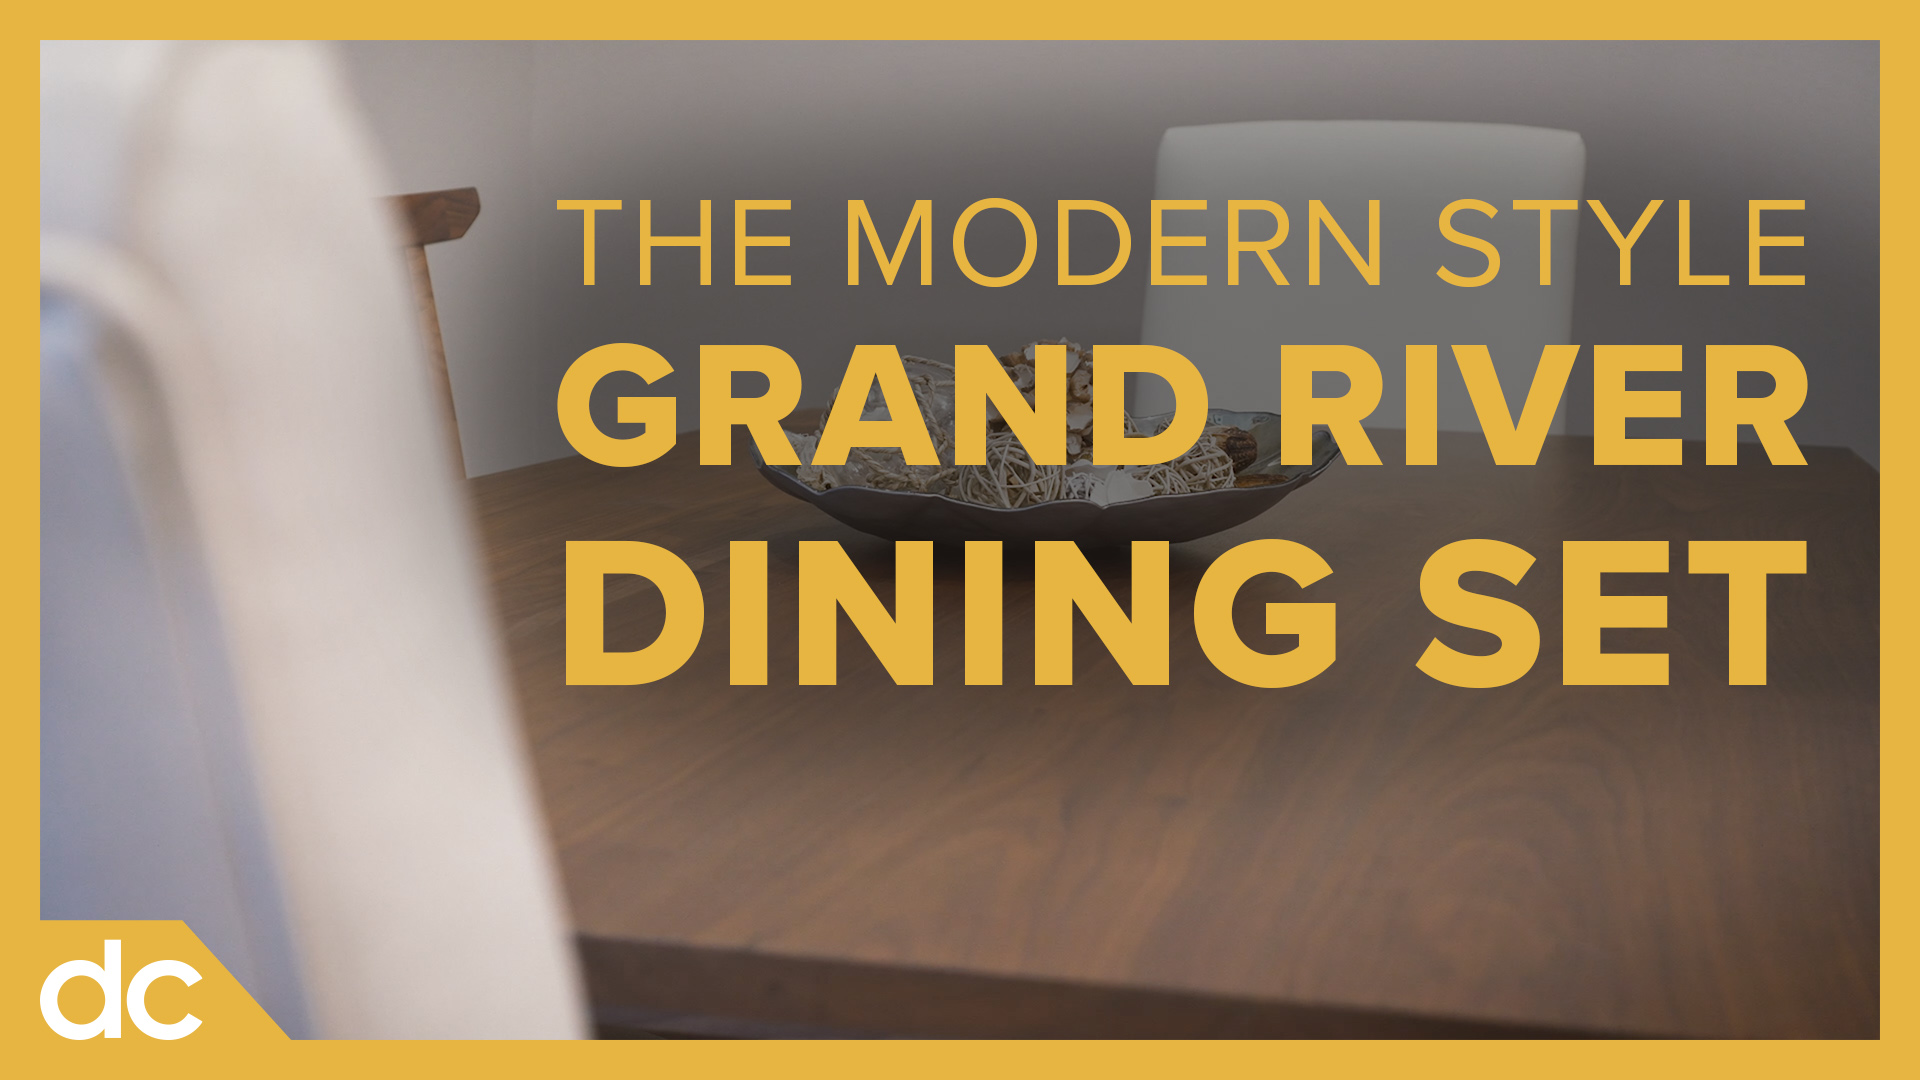 The Modern Style Grand River Dining Set